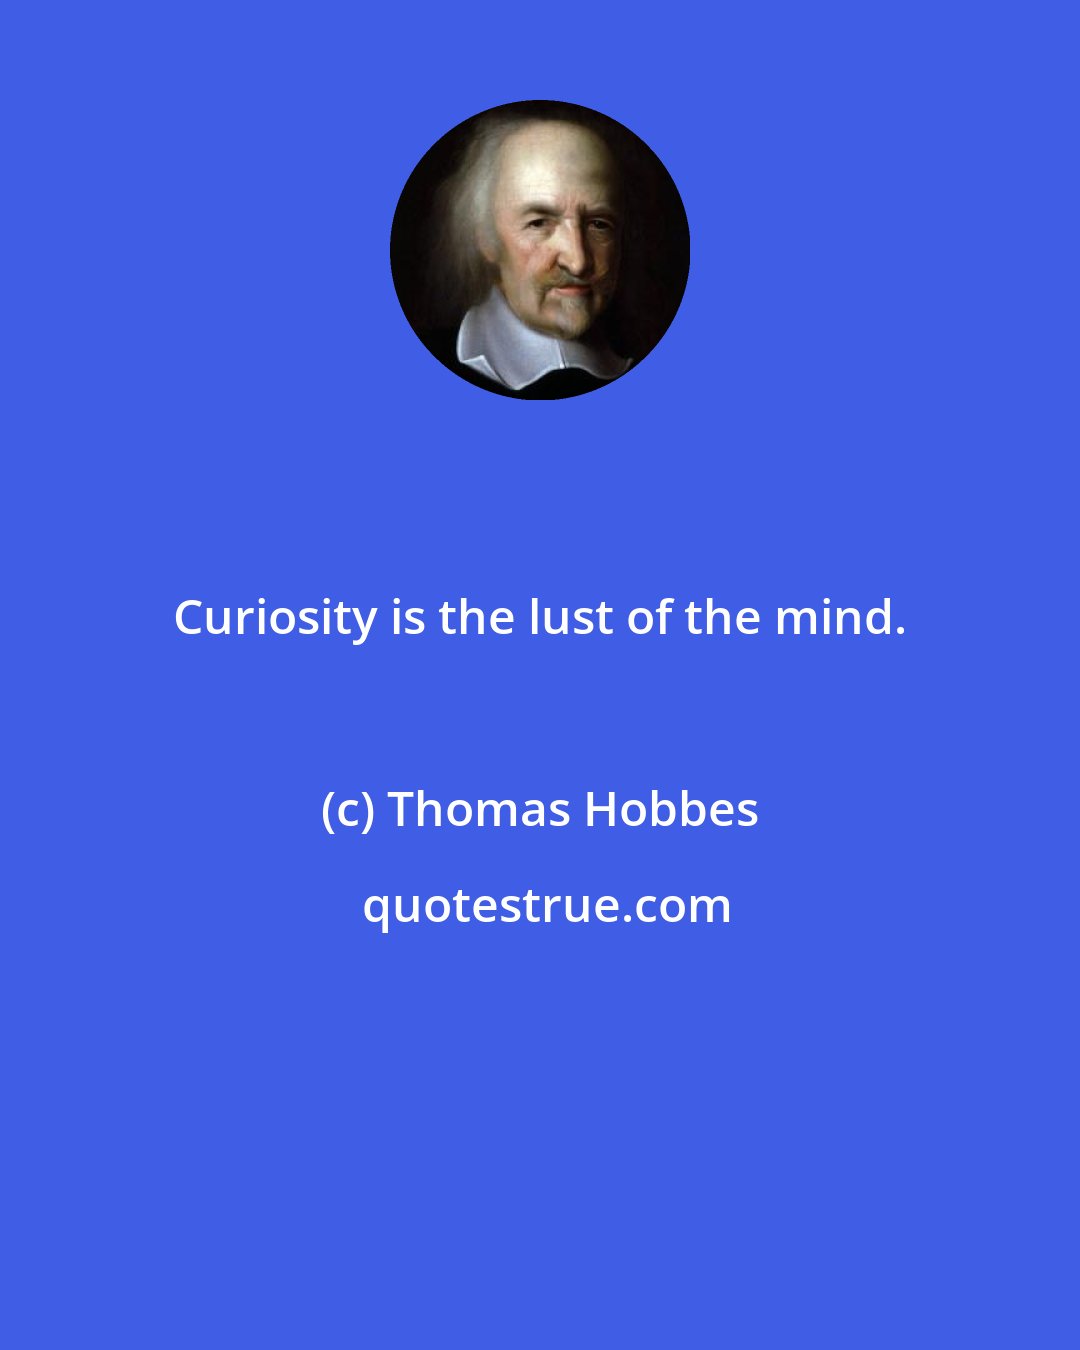 Thomas Hobbes: Curiosity is the lust of the mind.